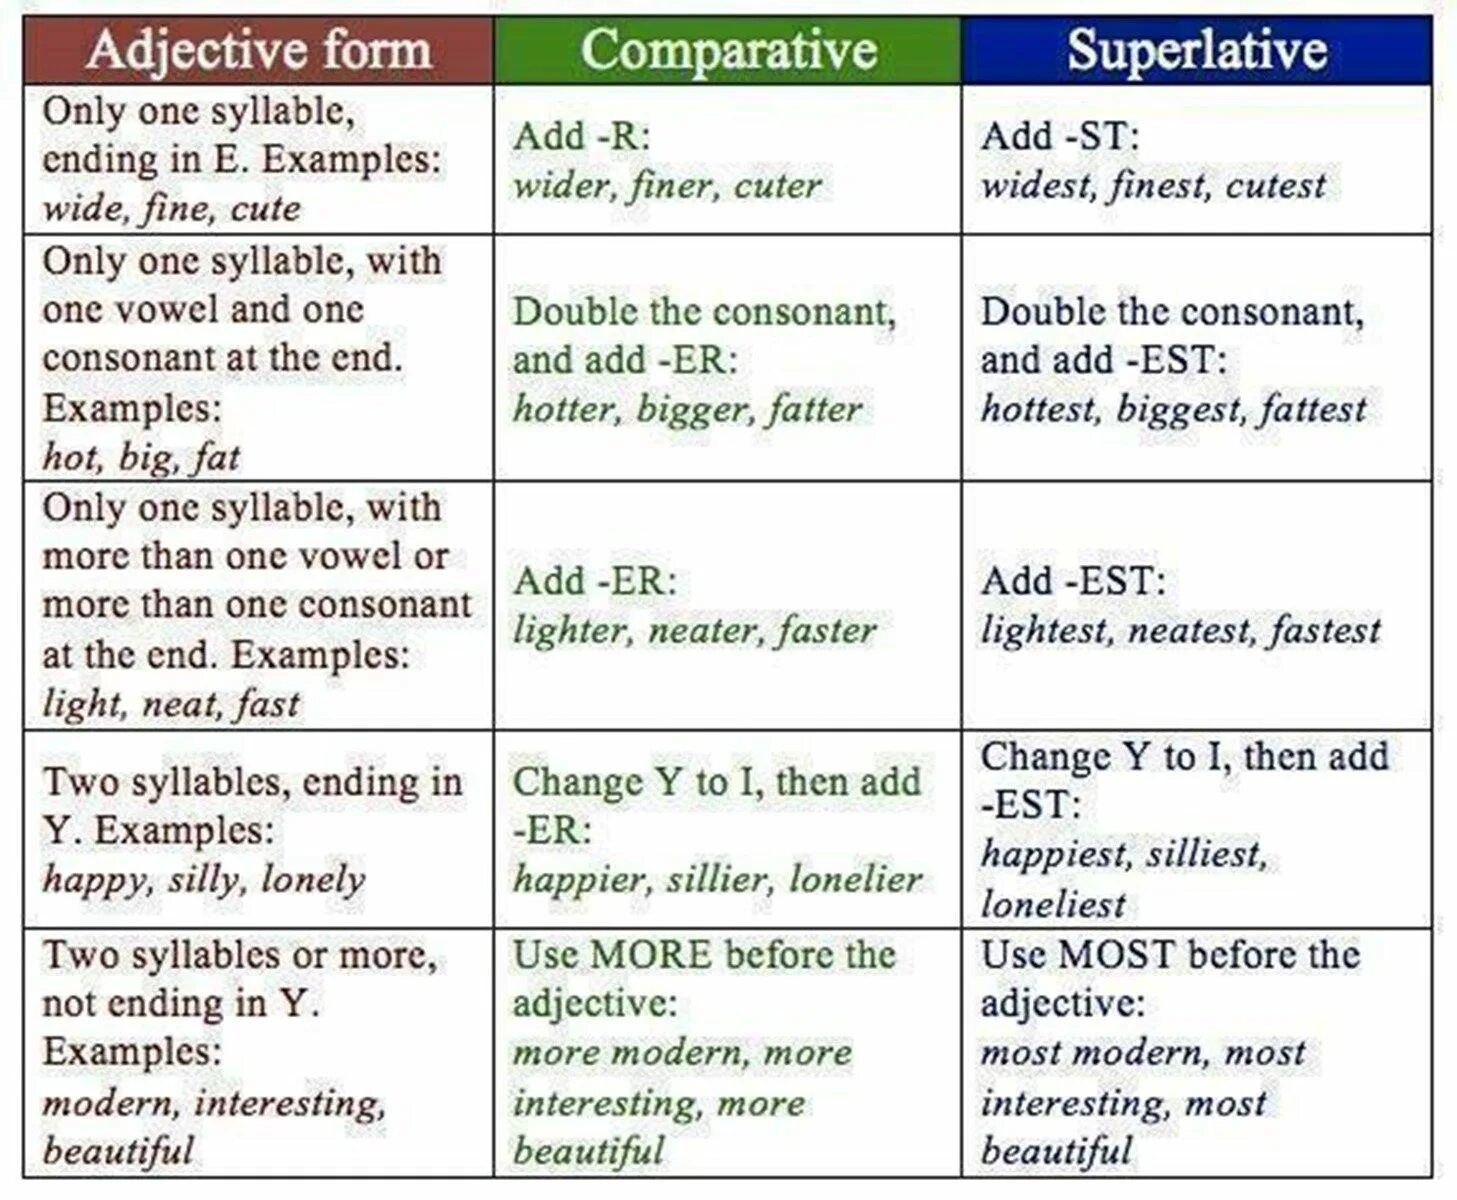 Comparatives and Superlatives правило таблица. Adjective Comparative Superlative таблица. Английский Comparative and Superlative. Таблица Comparative and Superlative. Comparative examples